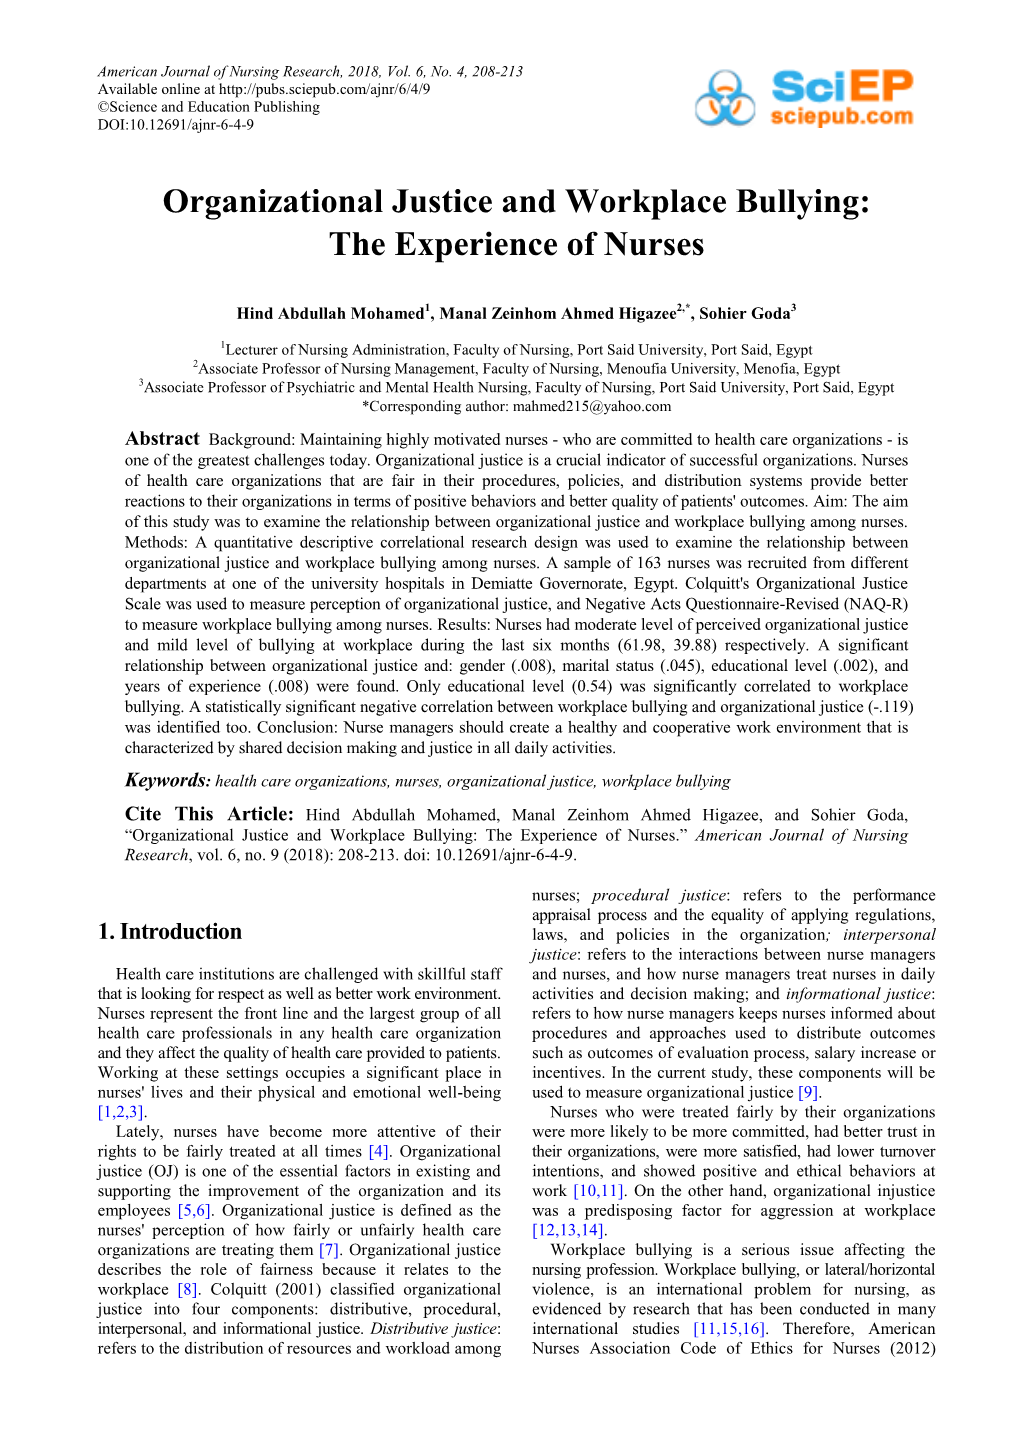 Organizational Justice and Workplace Bullying: the Experience of Nurses